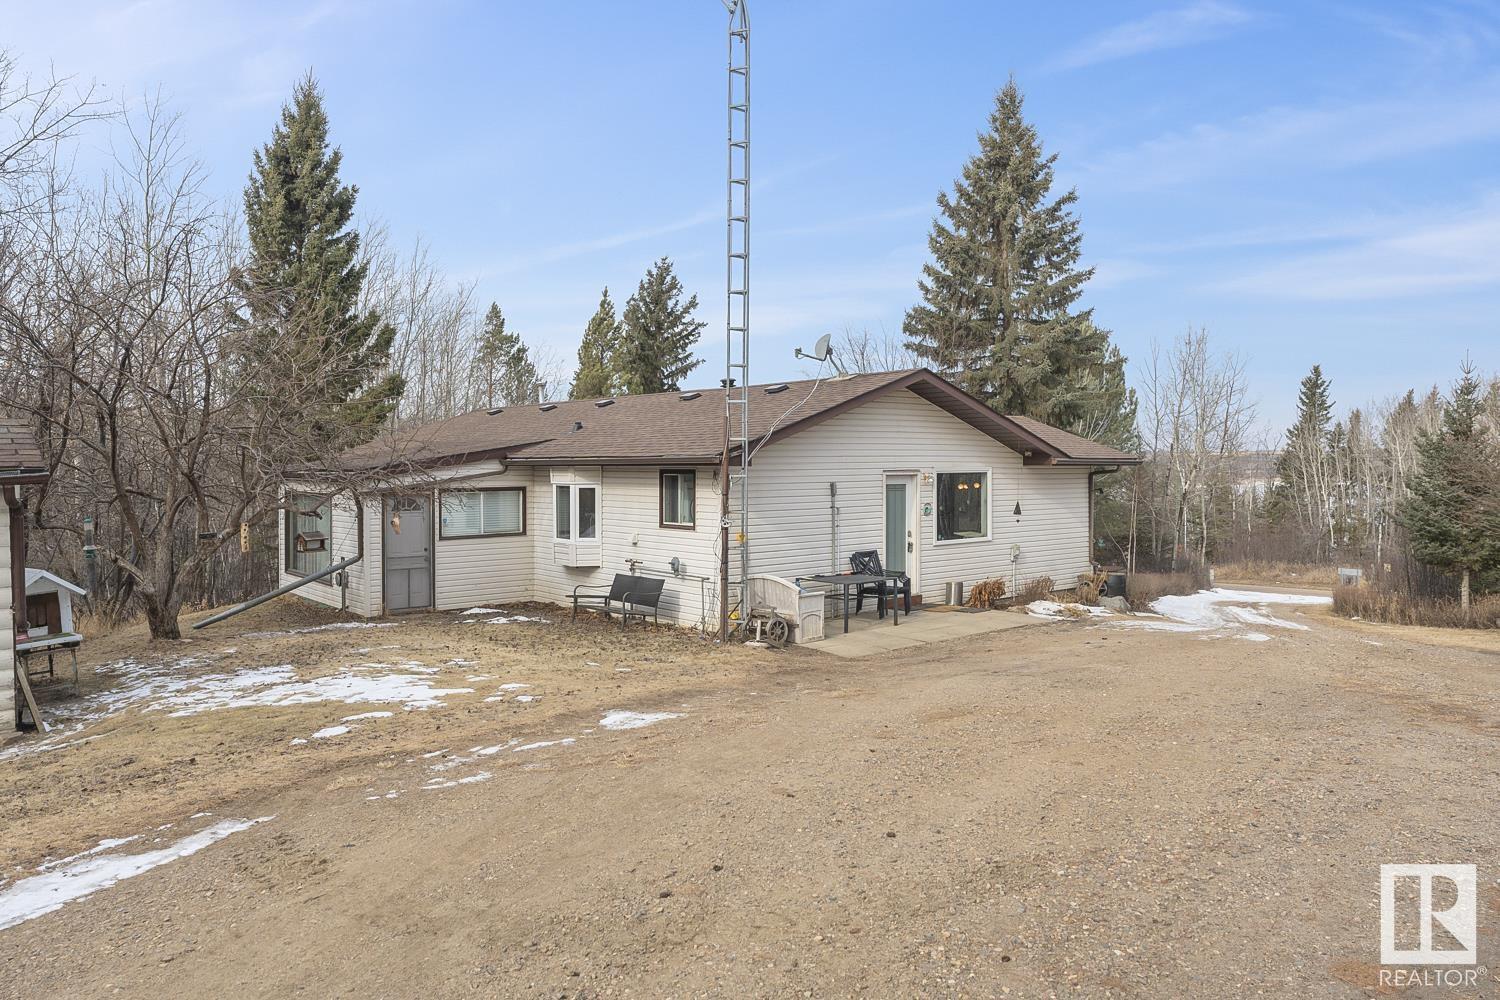 12279 Twp Rd 602 located in Rural Smoky Lake County, Alberta